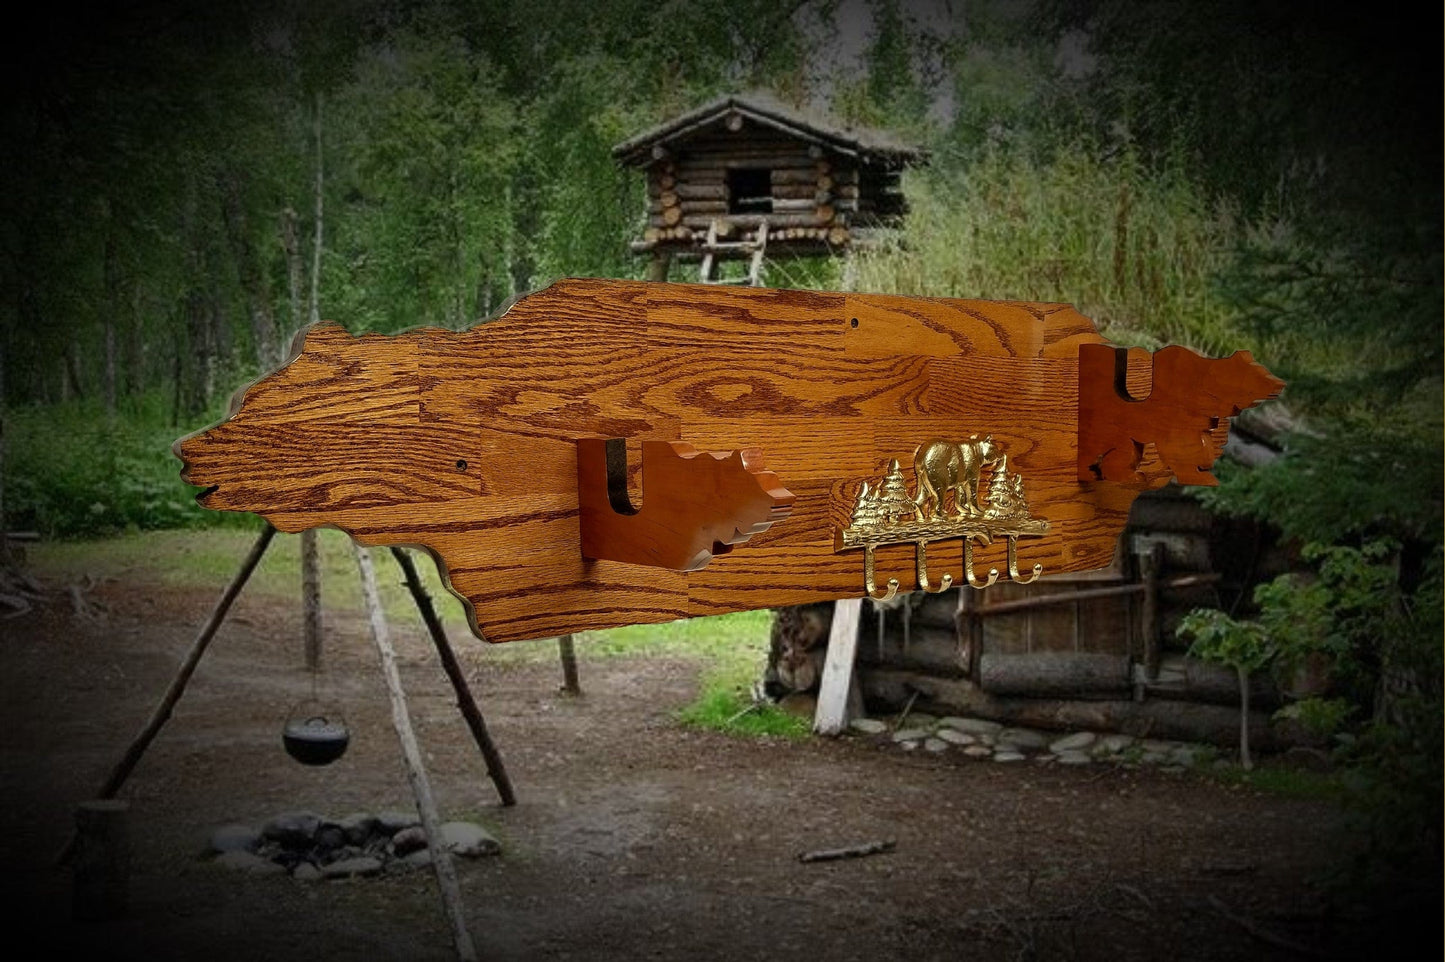 walkerwoodgifts Rustic Golden Bear Lever Action Rifle Gun Display Hunting Gift Lodge Cabin Cottage Décor